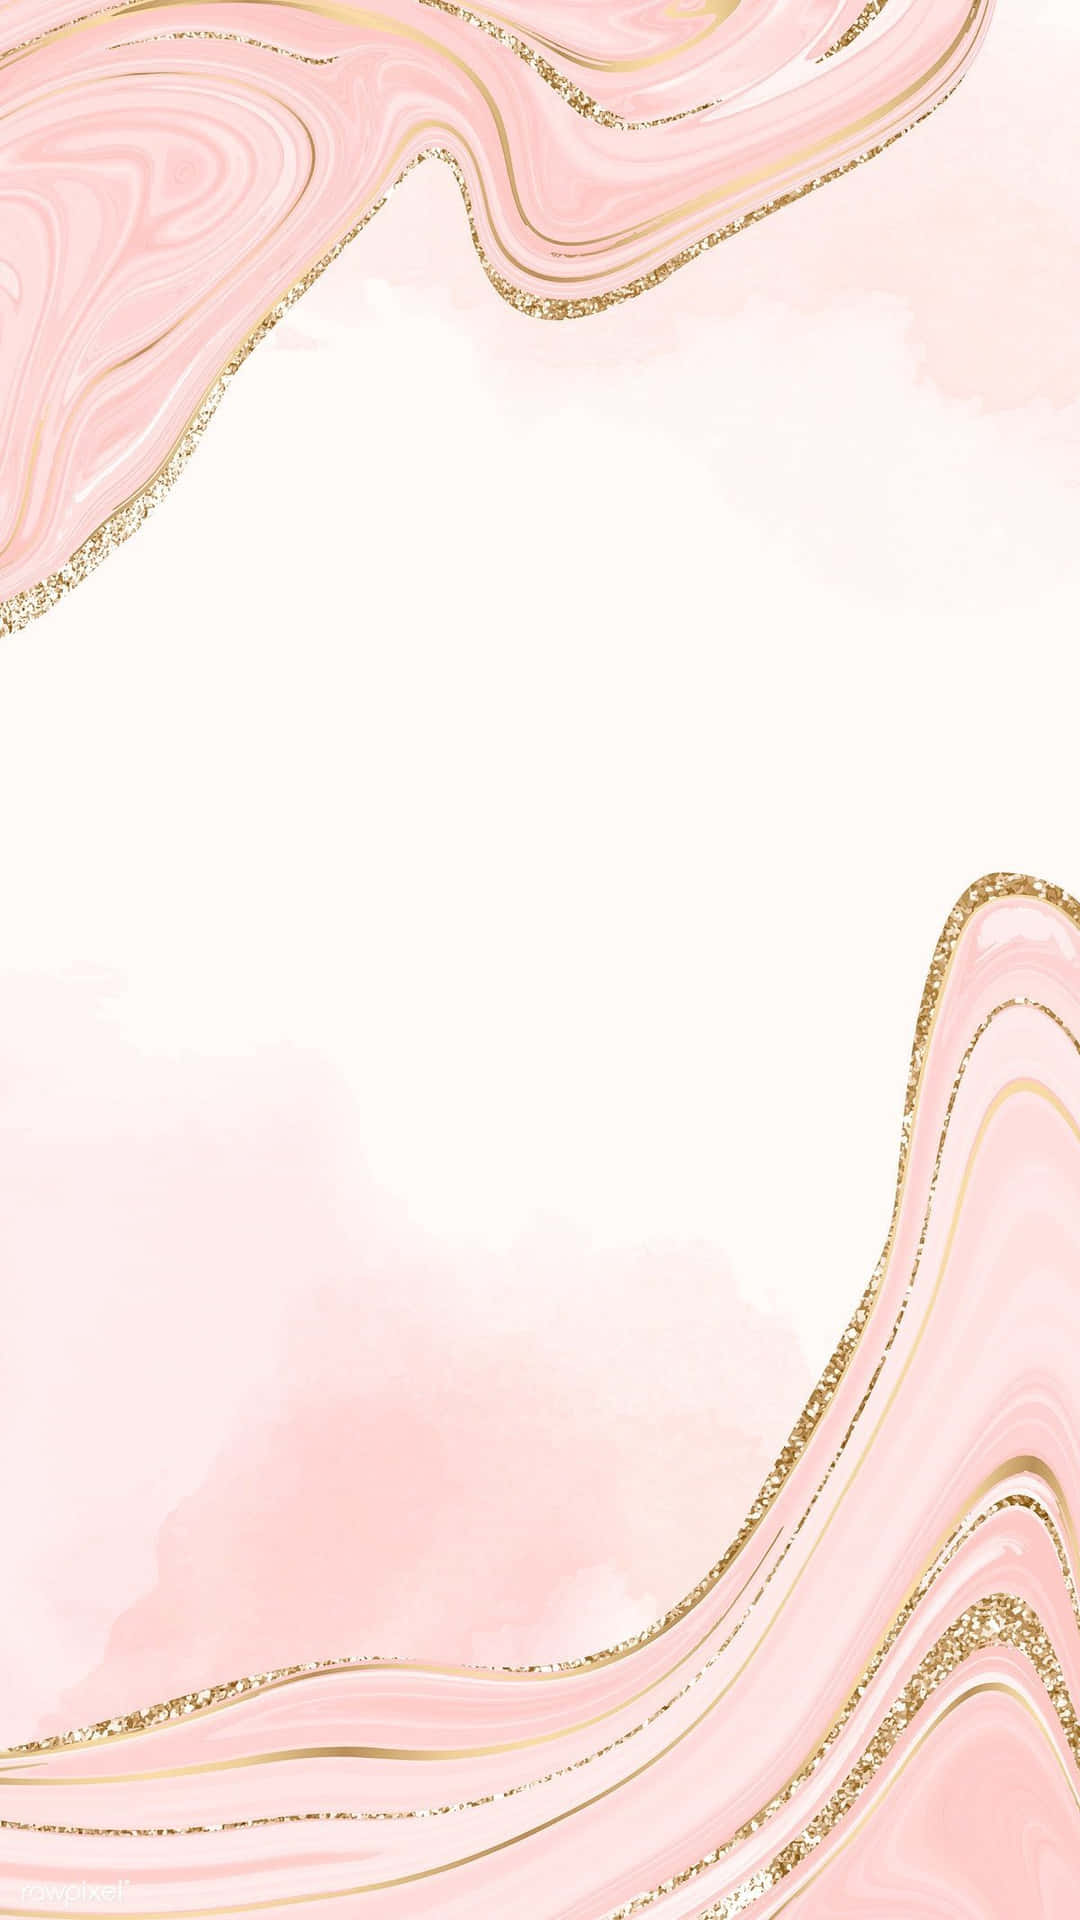 Enjoy the warm combination of Pink and Gold Wallpaper